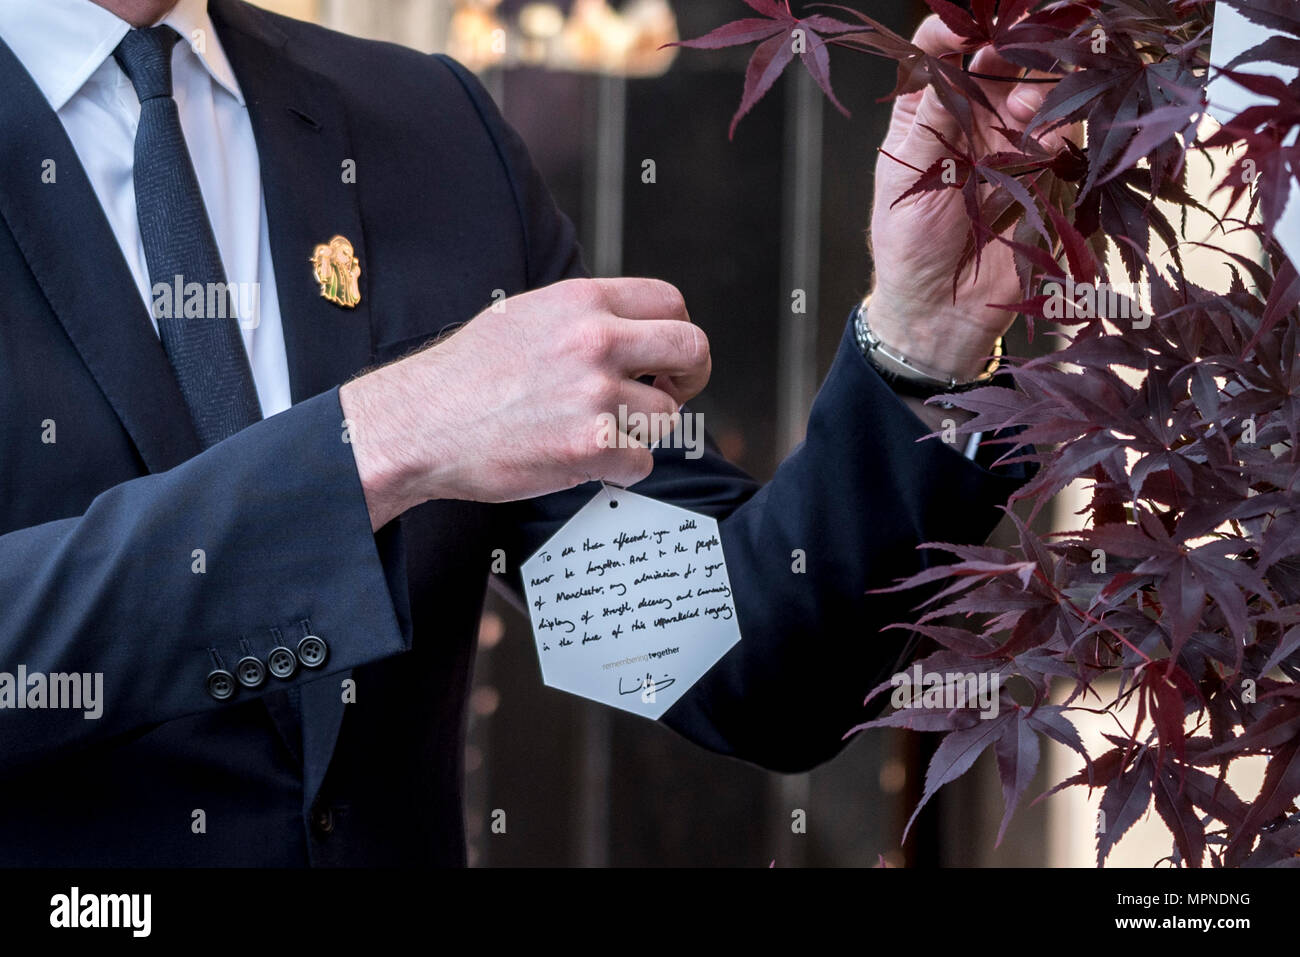 Prince William hangs a personalised hand-written message on one of 22 'Trees of Hope' as he leaves Manchester Cathedral after the national service of commemoration remembering the victims of the Arena bomb attack in Manchester, Britain, on May 22, 2018. Prince William and British Prime Minister Theresa May joined other politicians, as well as family members of those killed, and first responders to the scene of the terror attack, whilst thousands of people gathered in Manchester Tuesday on the first anniversary of a terror attack in the city which left 22 people dead. Stock Photo